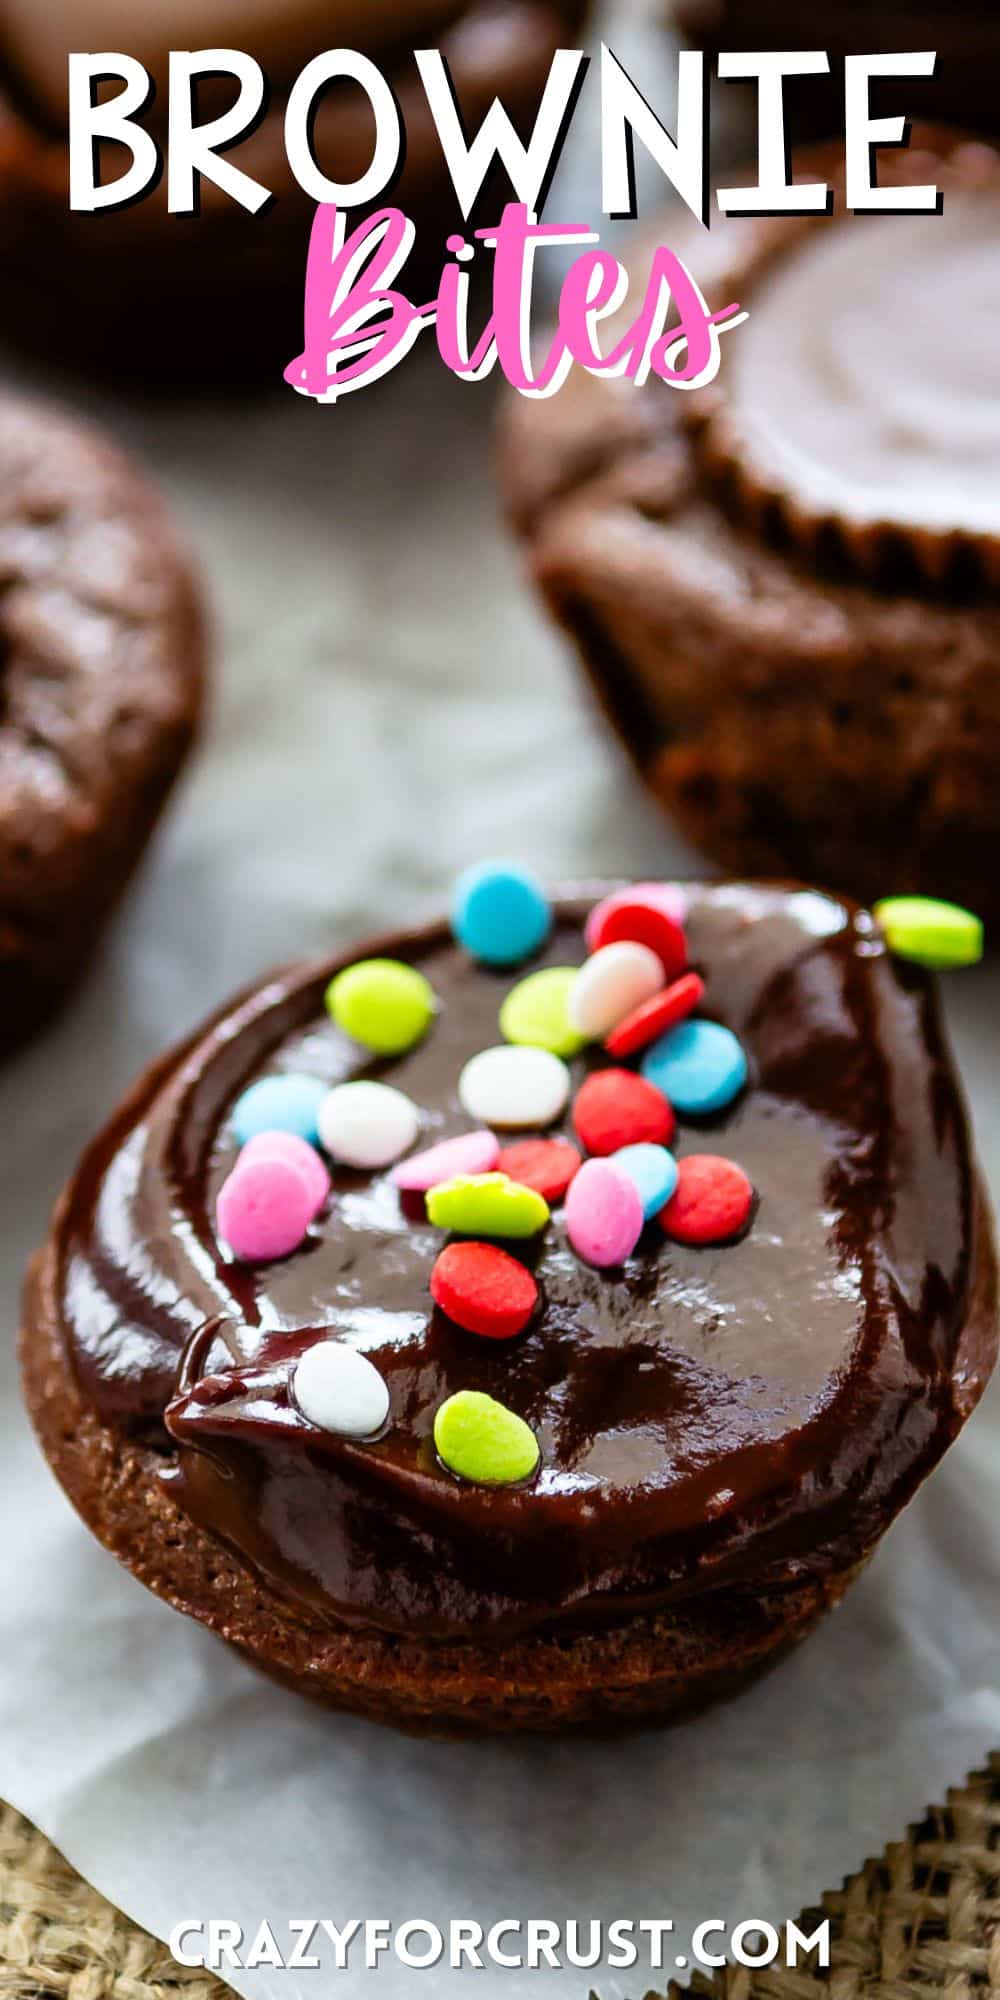 brownie bite on parchment paper with chocolate frosting and colorful sprinkles on top with words on the image.